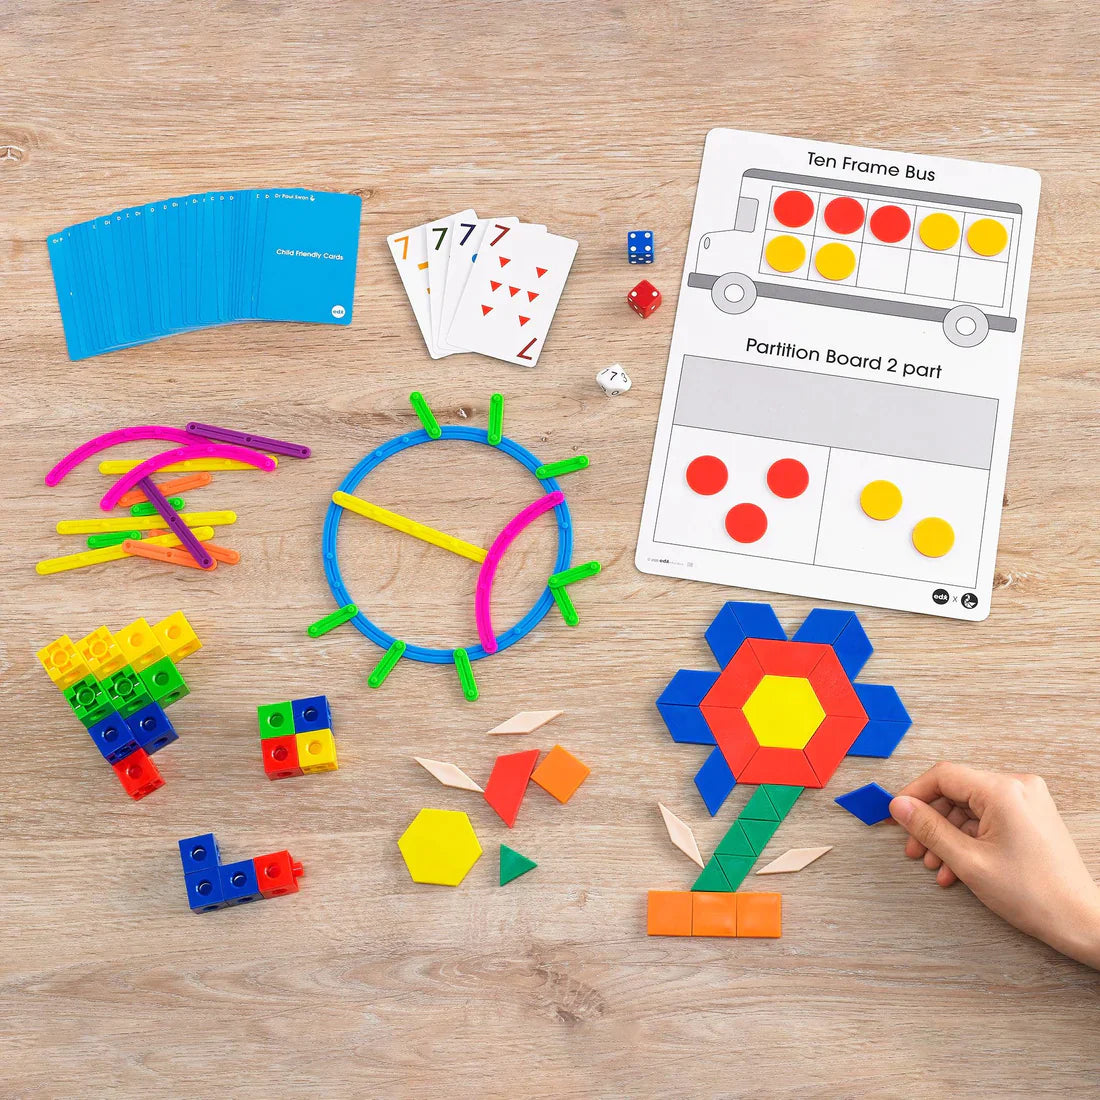 TickiT: Math Home Learning Set 5-6 years old